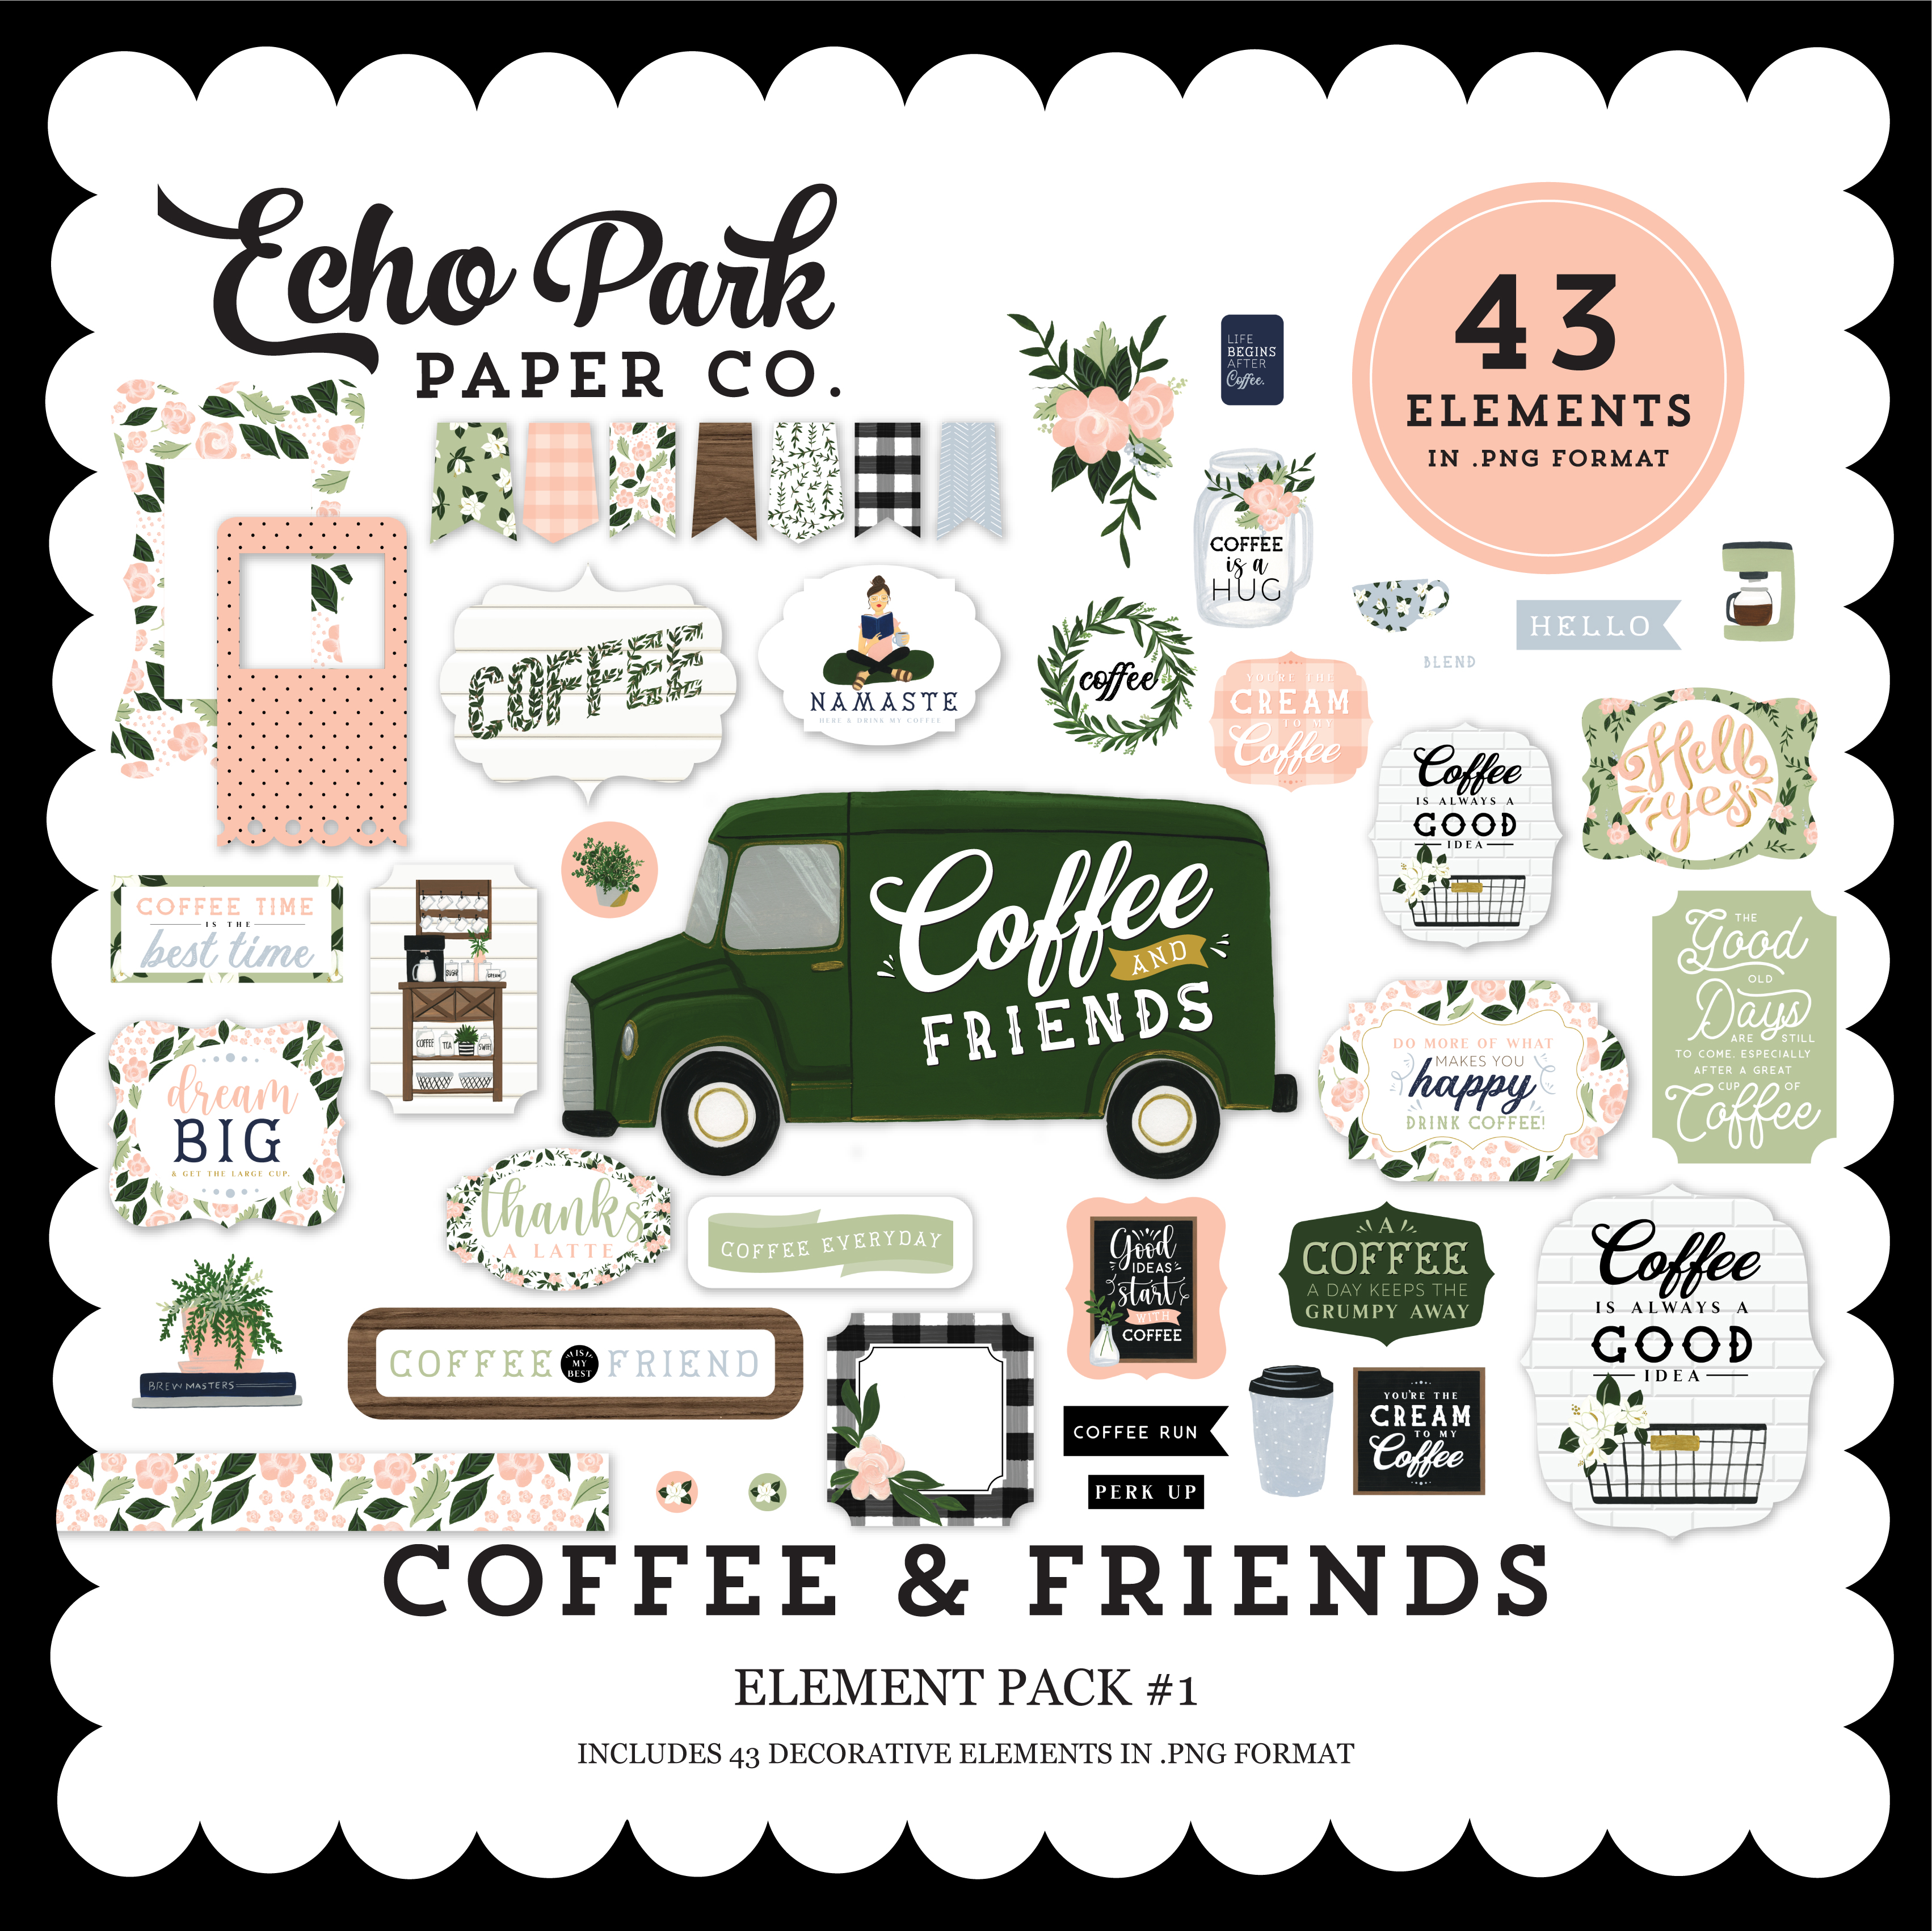 Coffee & Friends Element Pack #1